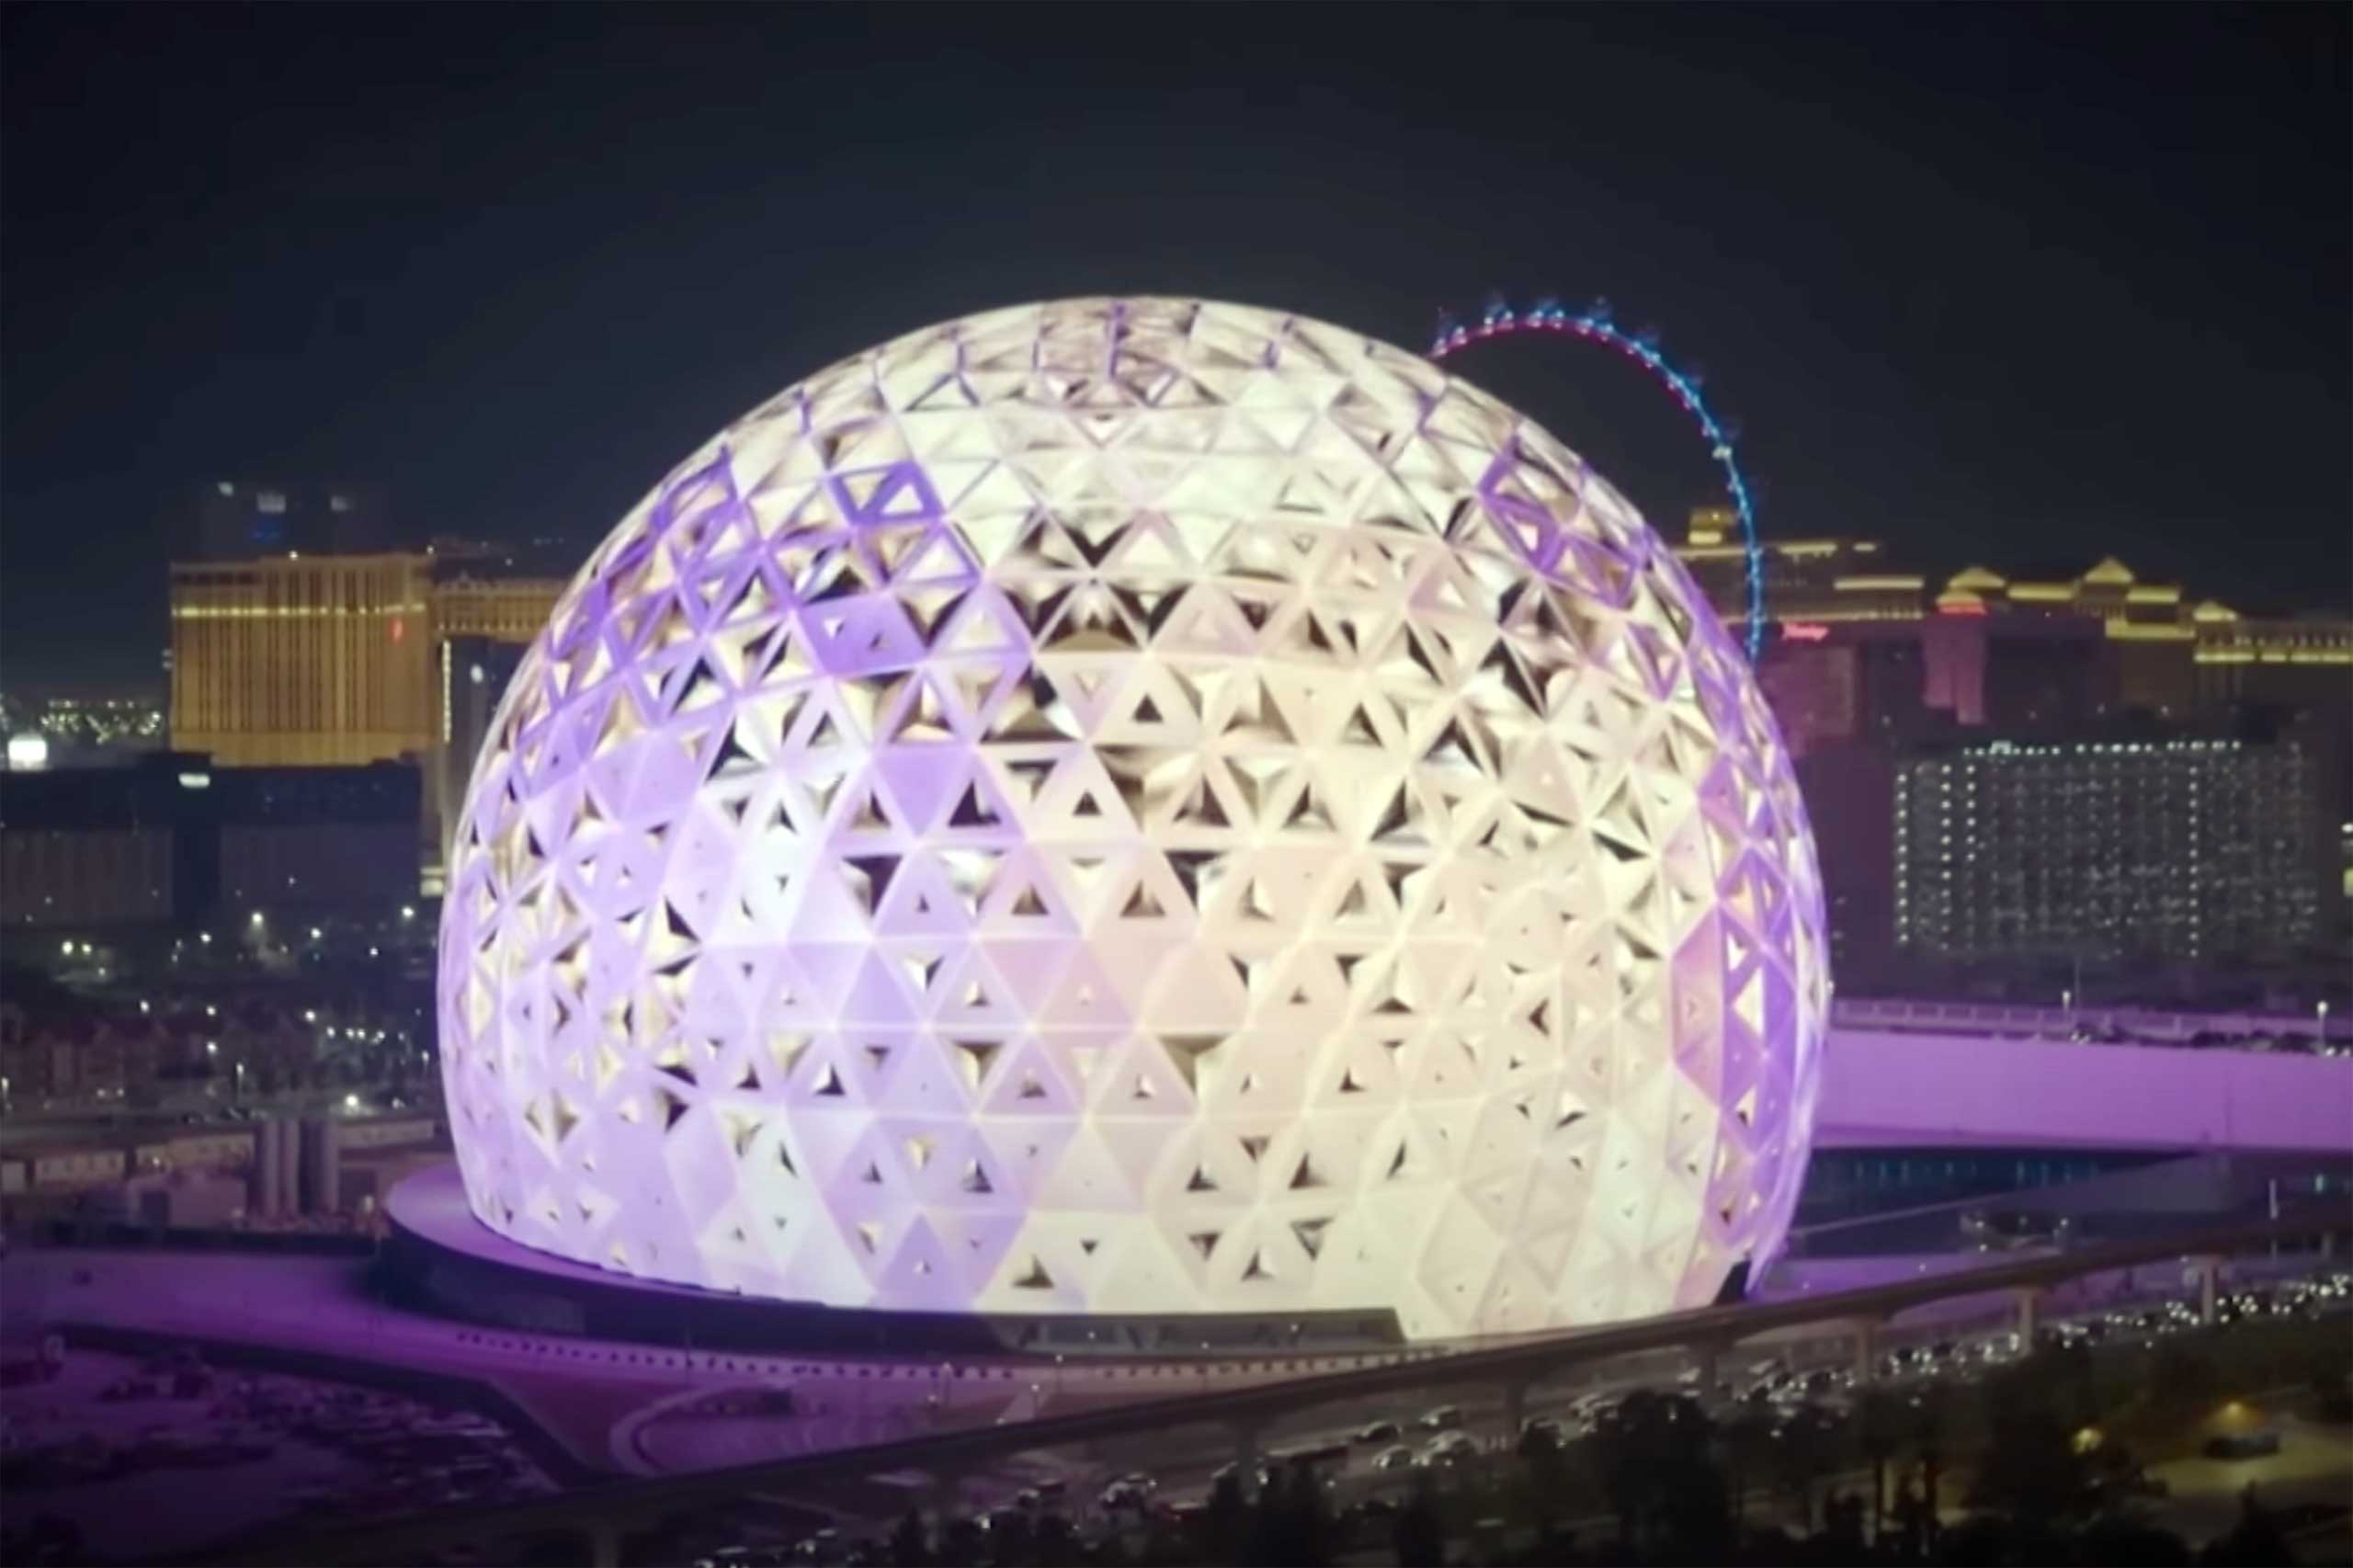 New pop-up outdoor light festival coming to Las Vegas